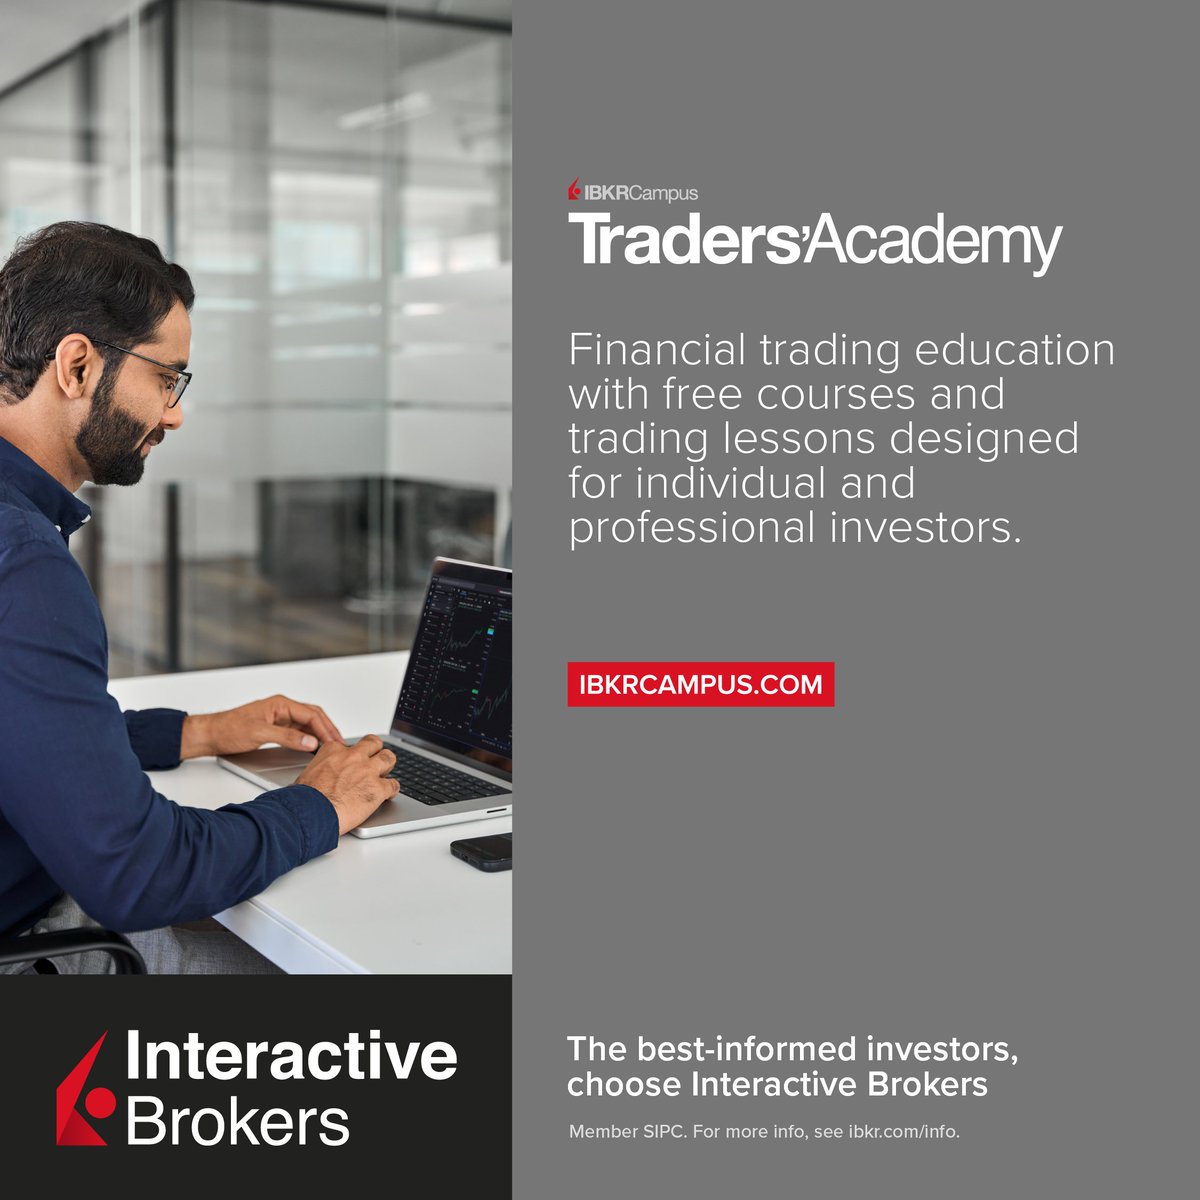 Enhance your #trading knowledge with @IBKR_Campus's Traders' Academy offering free, comprehensive courses designed by #finance professionals. Start today: spr.ly/6018d4qli